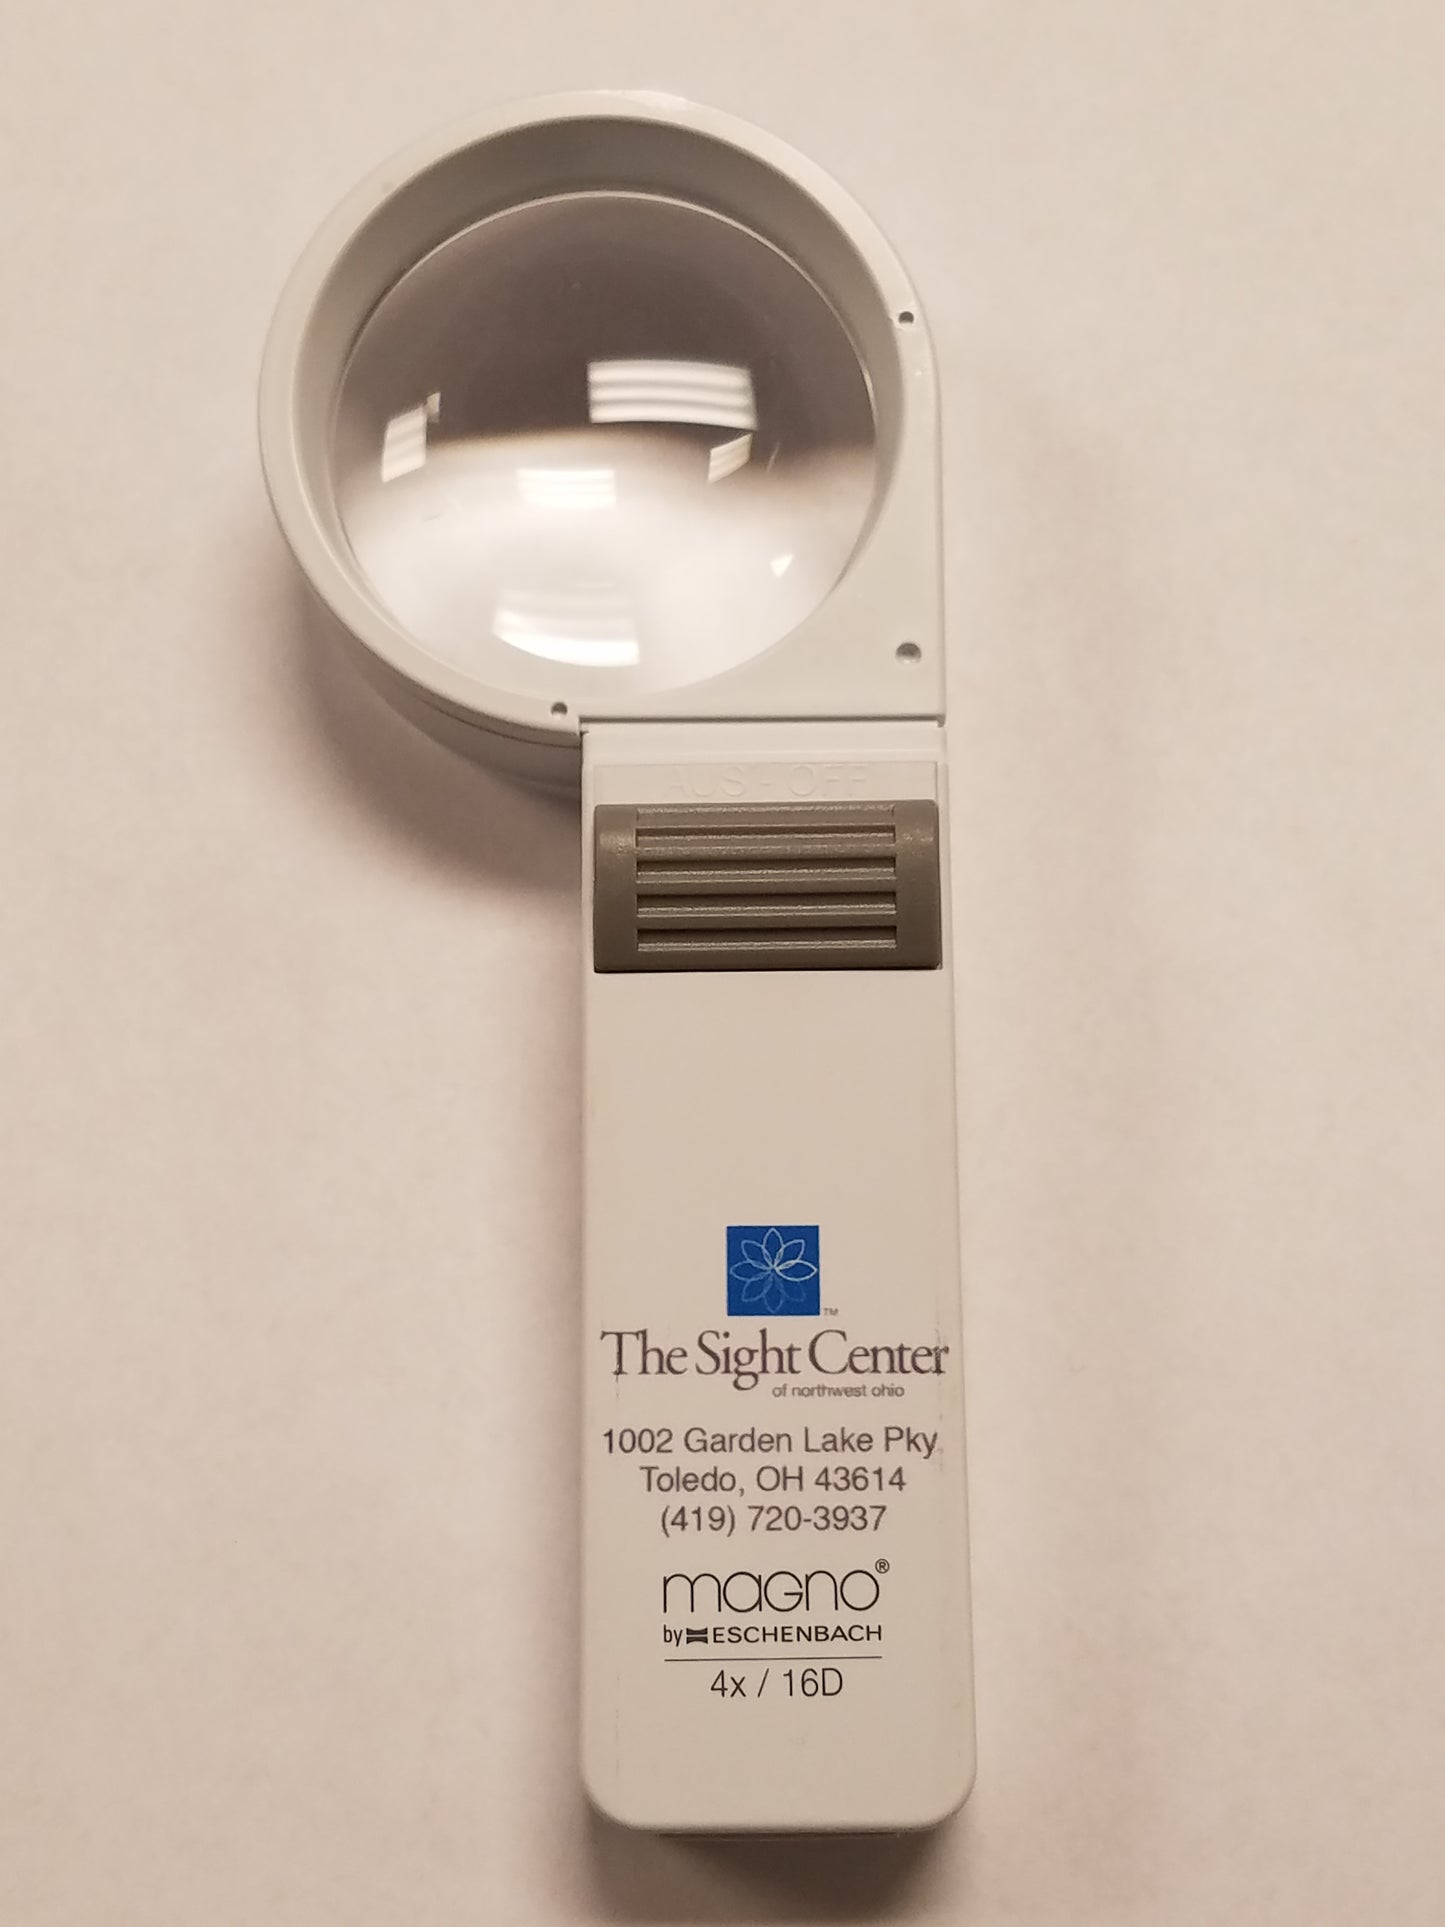 a 4x Hand Held Magnifier with the Sight Center Logo, address and phone number